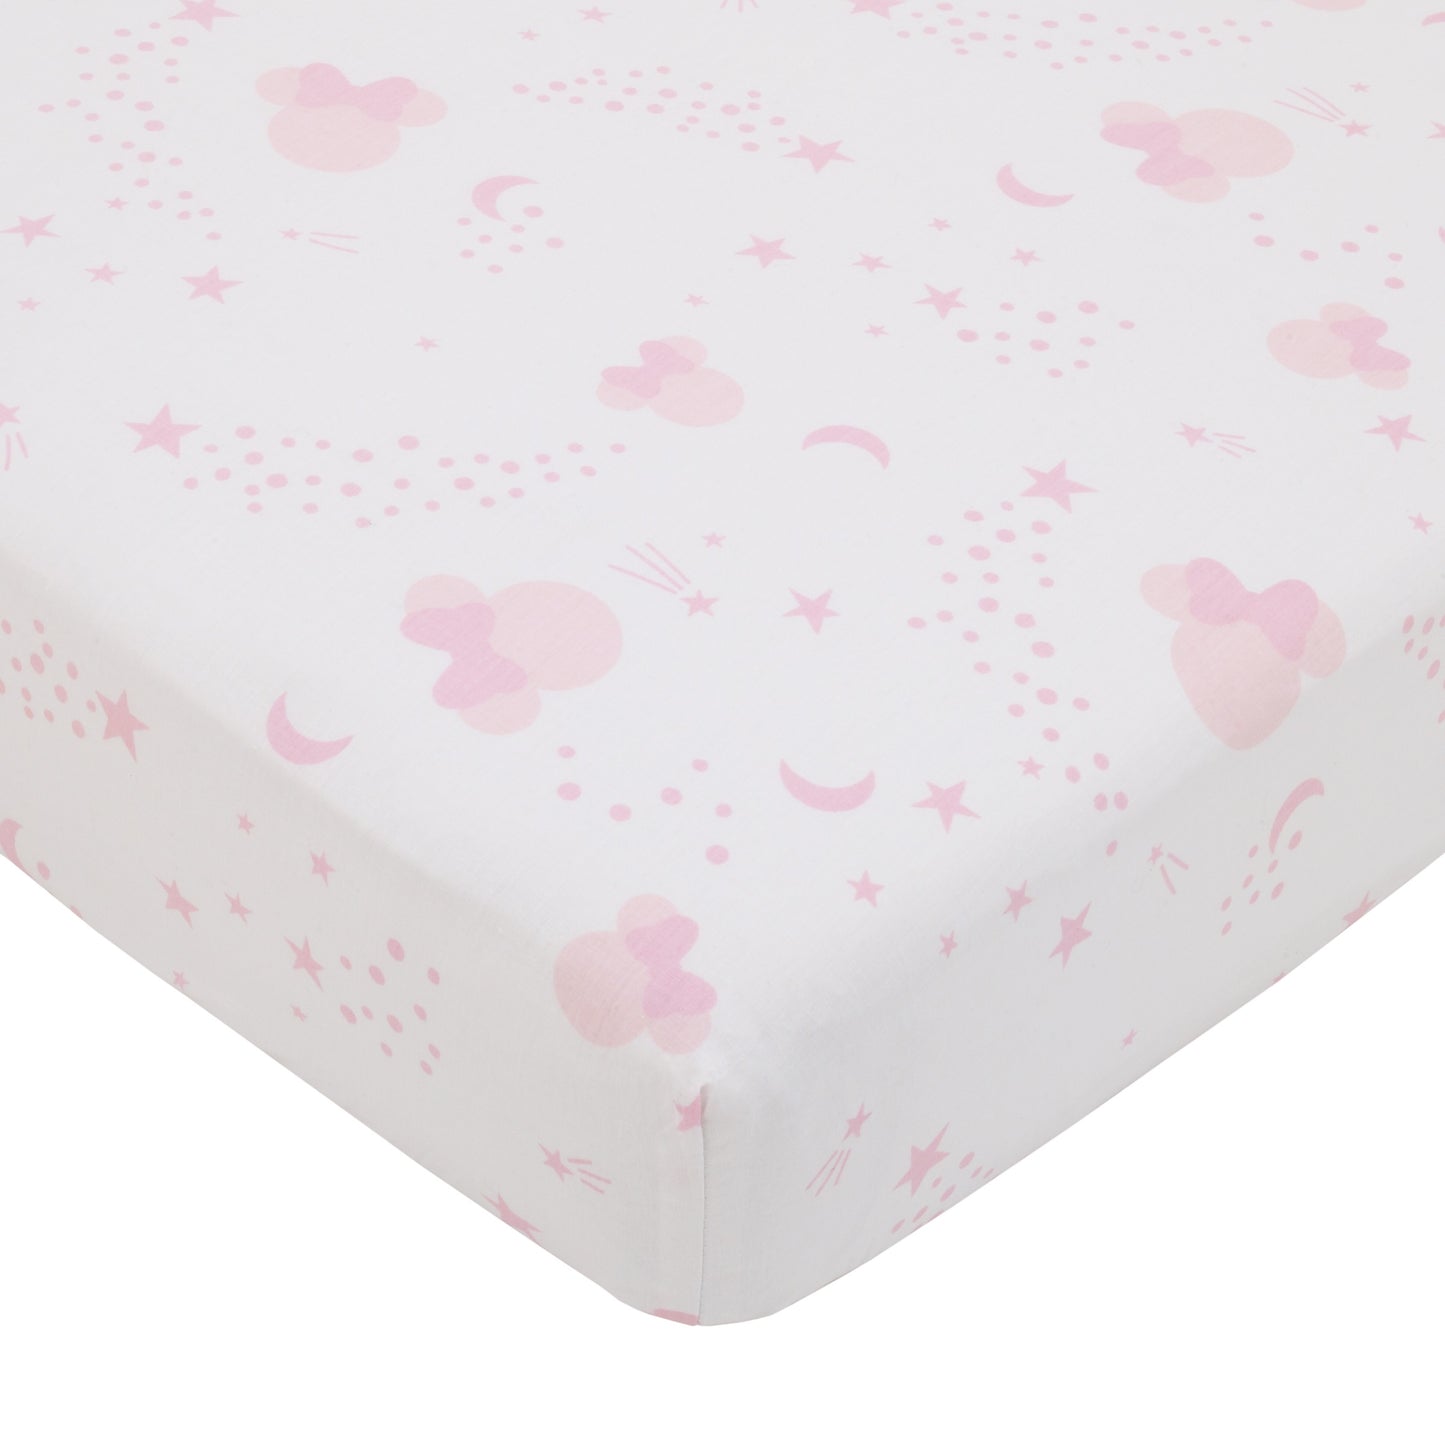 Disney Minnie Mouse Twinkle Twinkle Minnie Pink Stars and Minnie Outlines 100% Cotton Fitted Crib Sheet